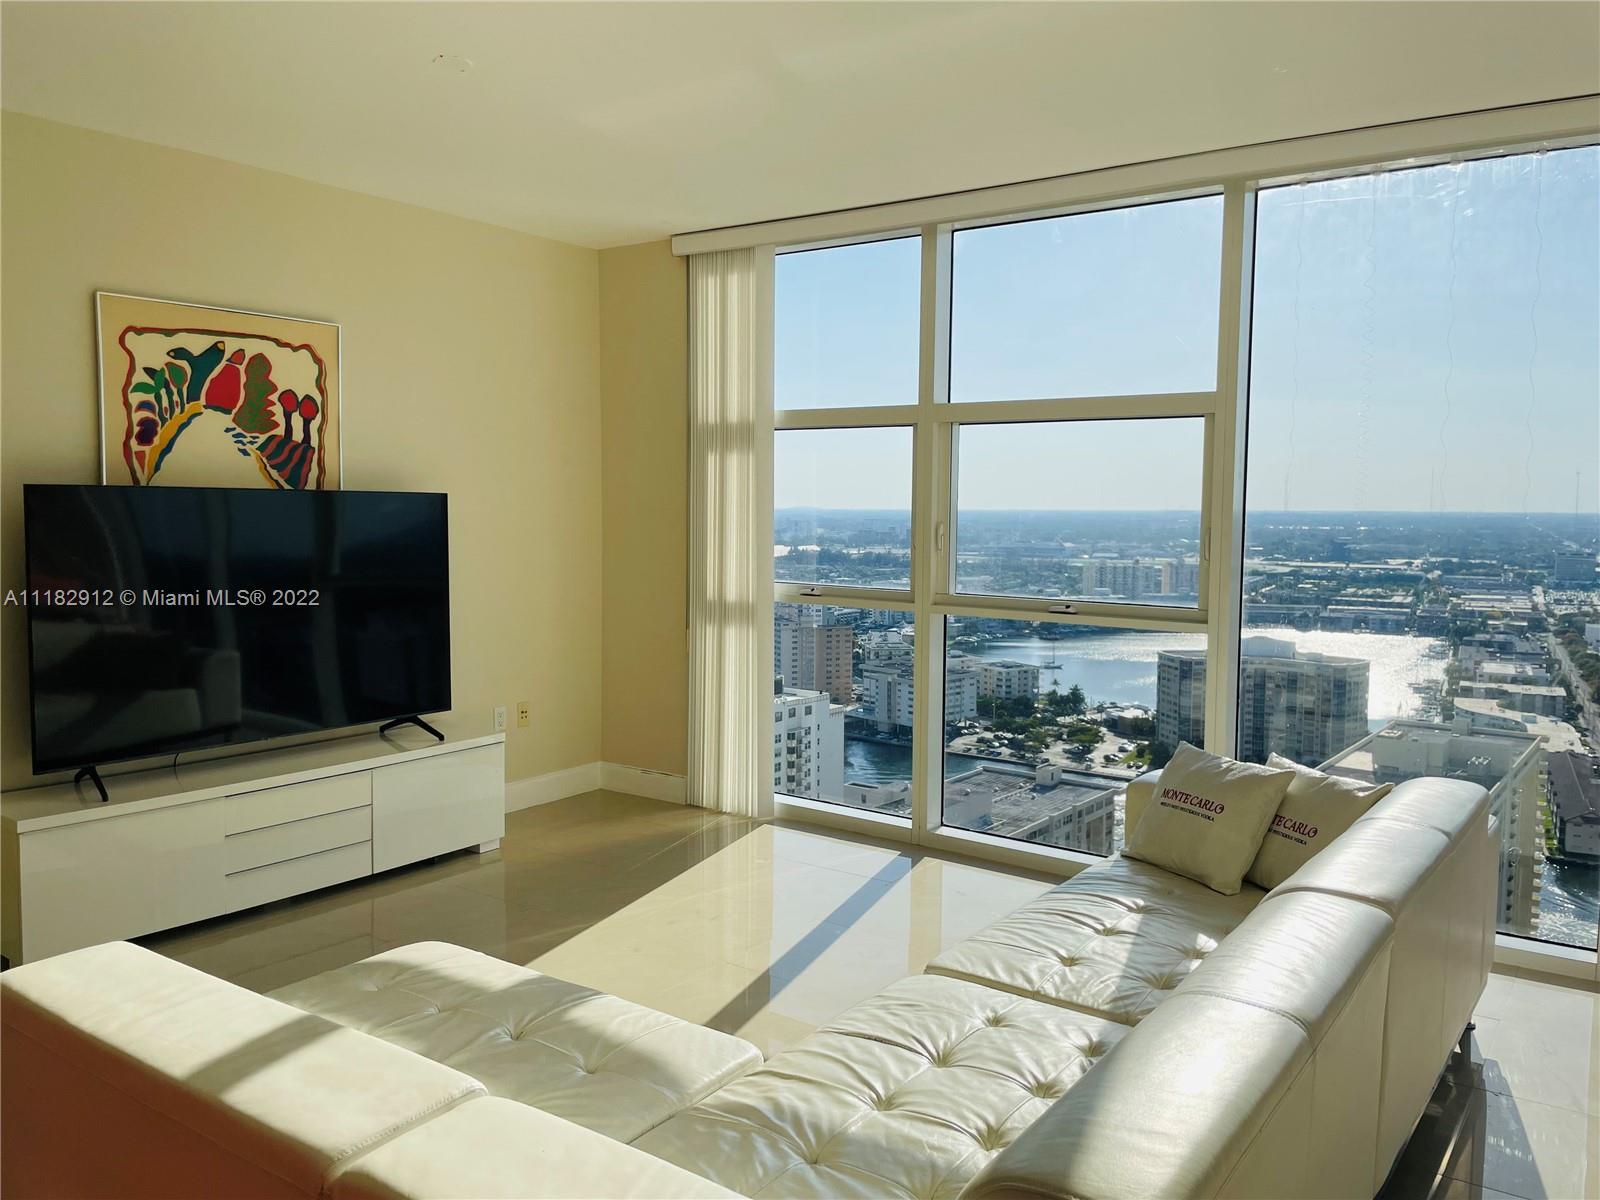 Large 1bed/1bath, 871 SqFt (80.9 m²) *** NO BALCONY *** Washer and Dryer inside. Best sunsets from t